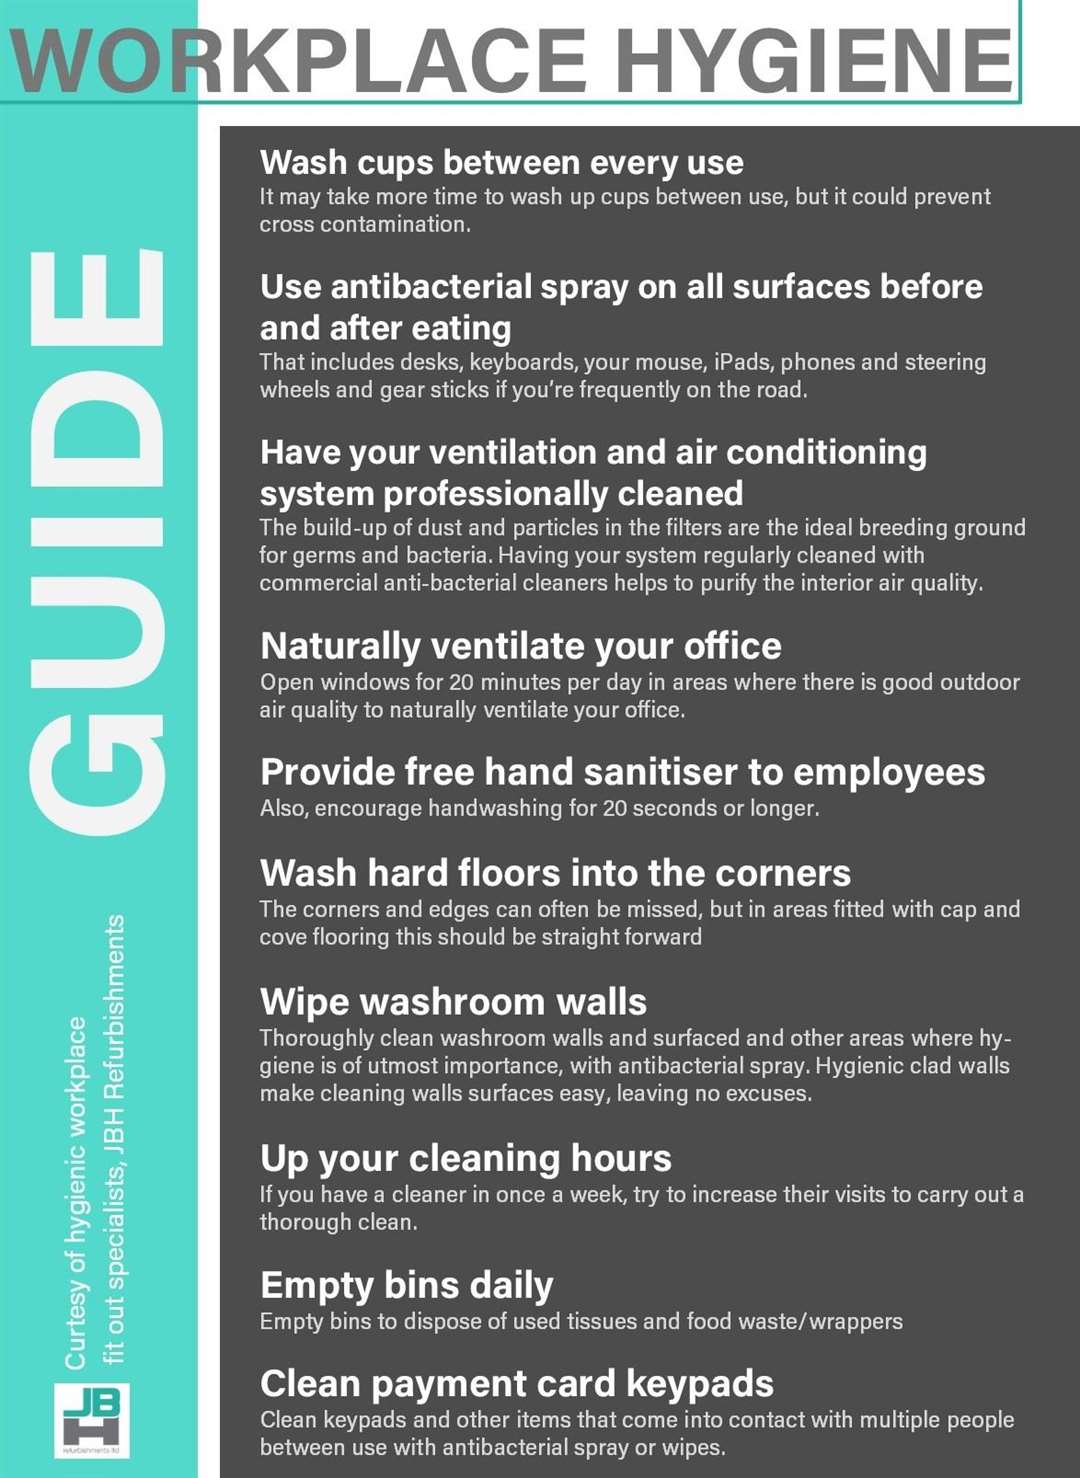 JBH Refurbishment's guide to hygiene in the workplace